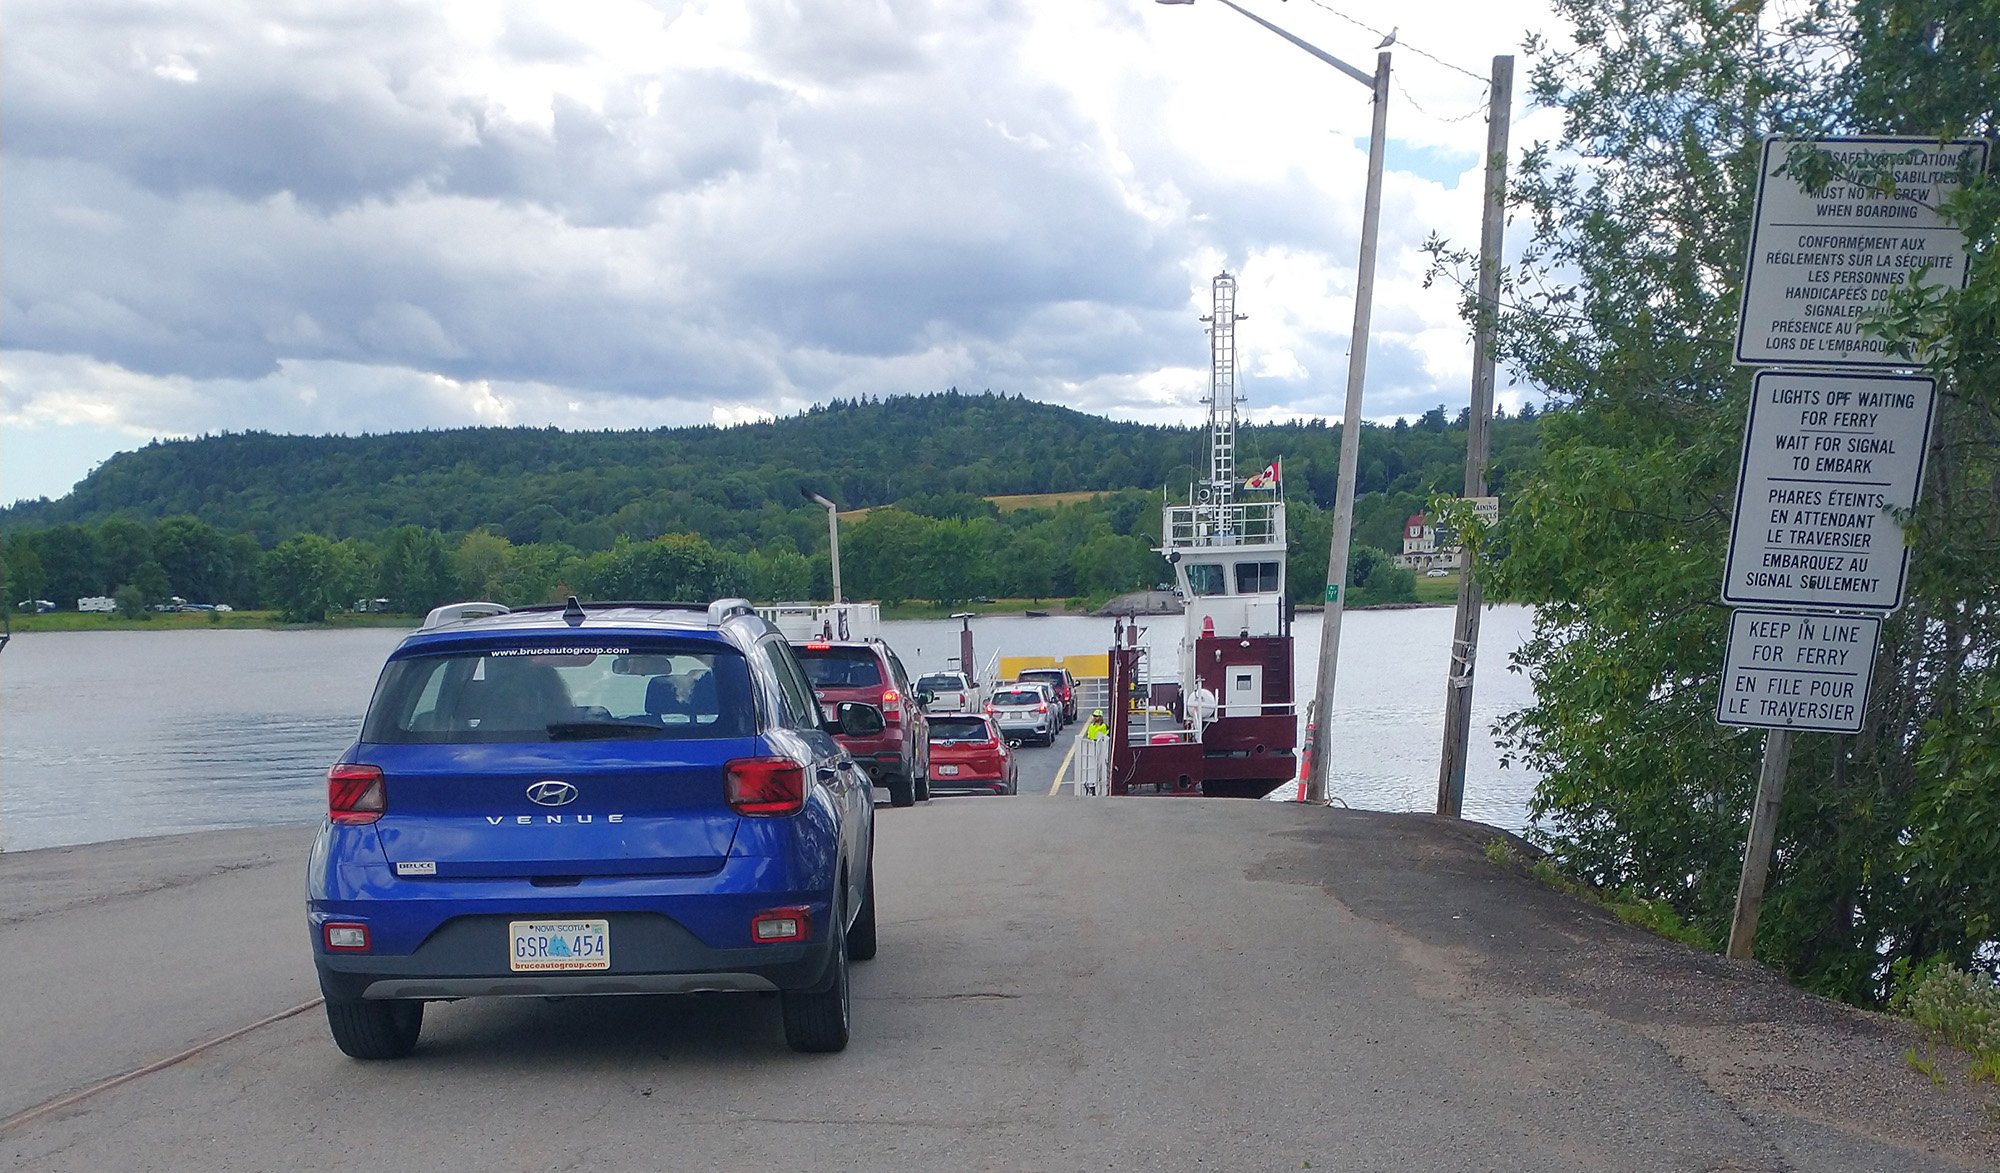 Second cable ferry ride! Weeeeeee